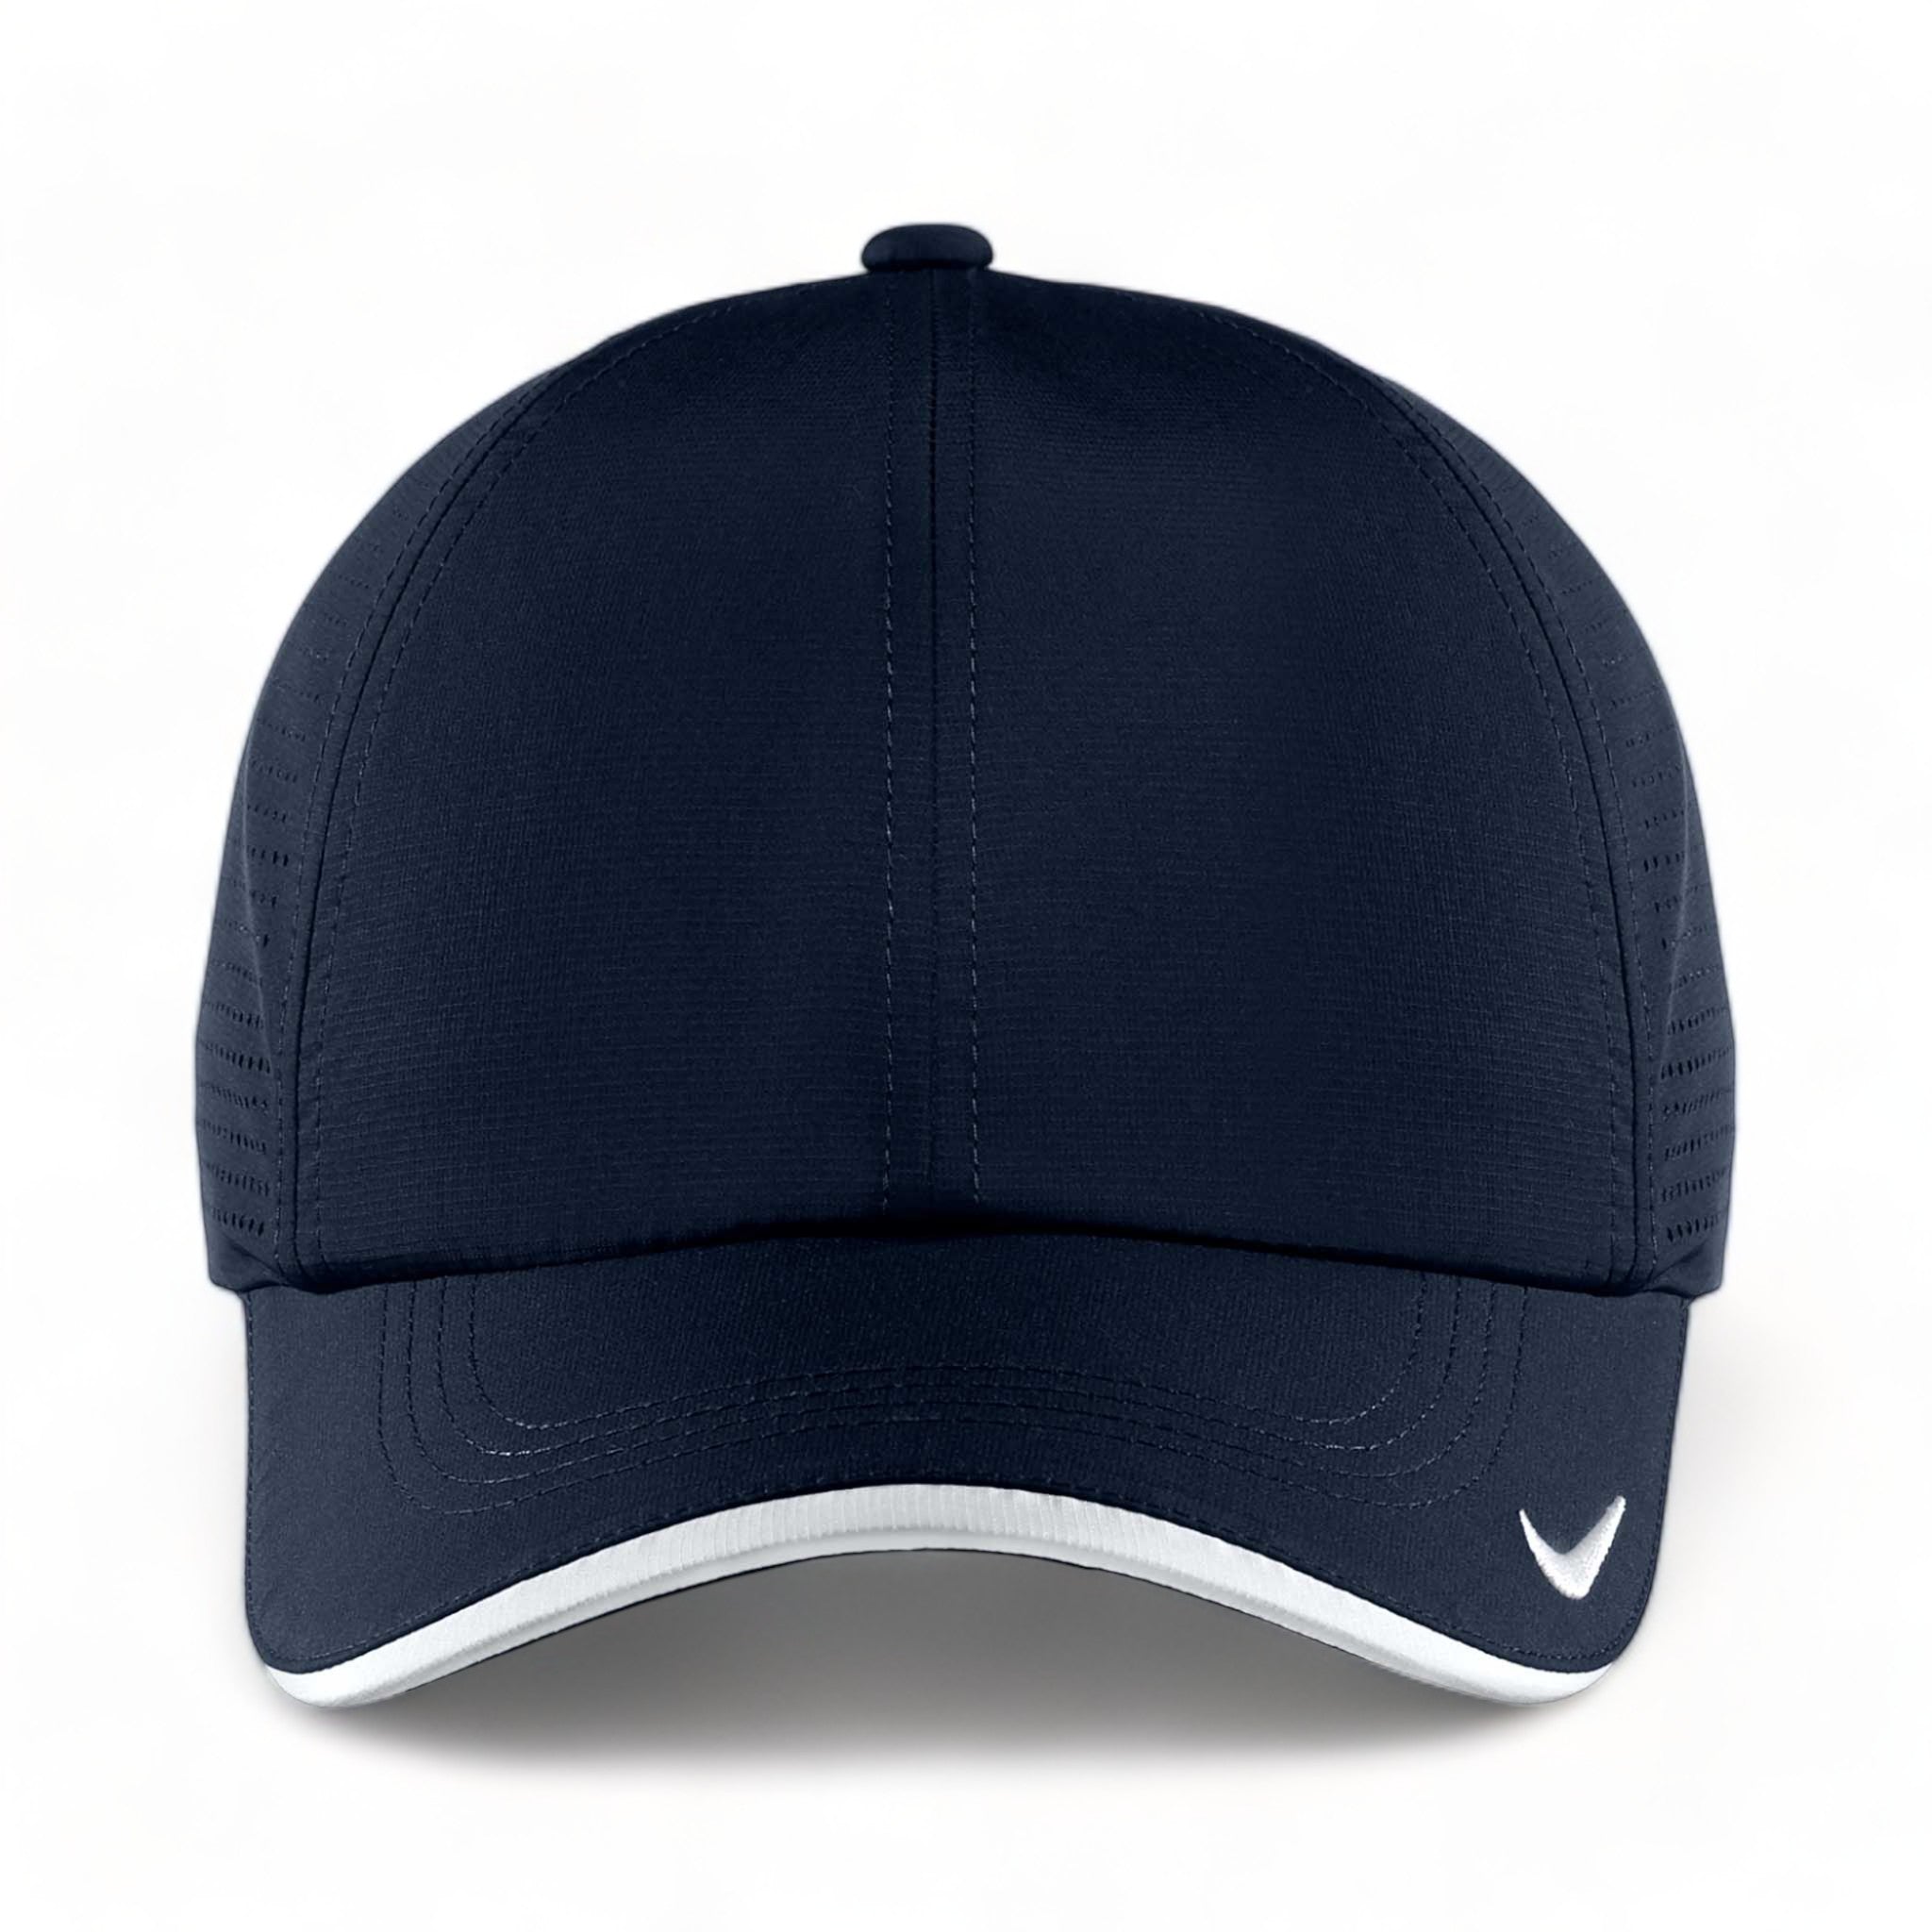 Front view of Nike NKFB6445 custom hat in navy and white